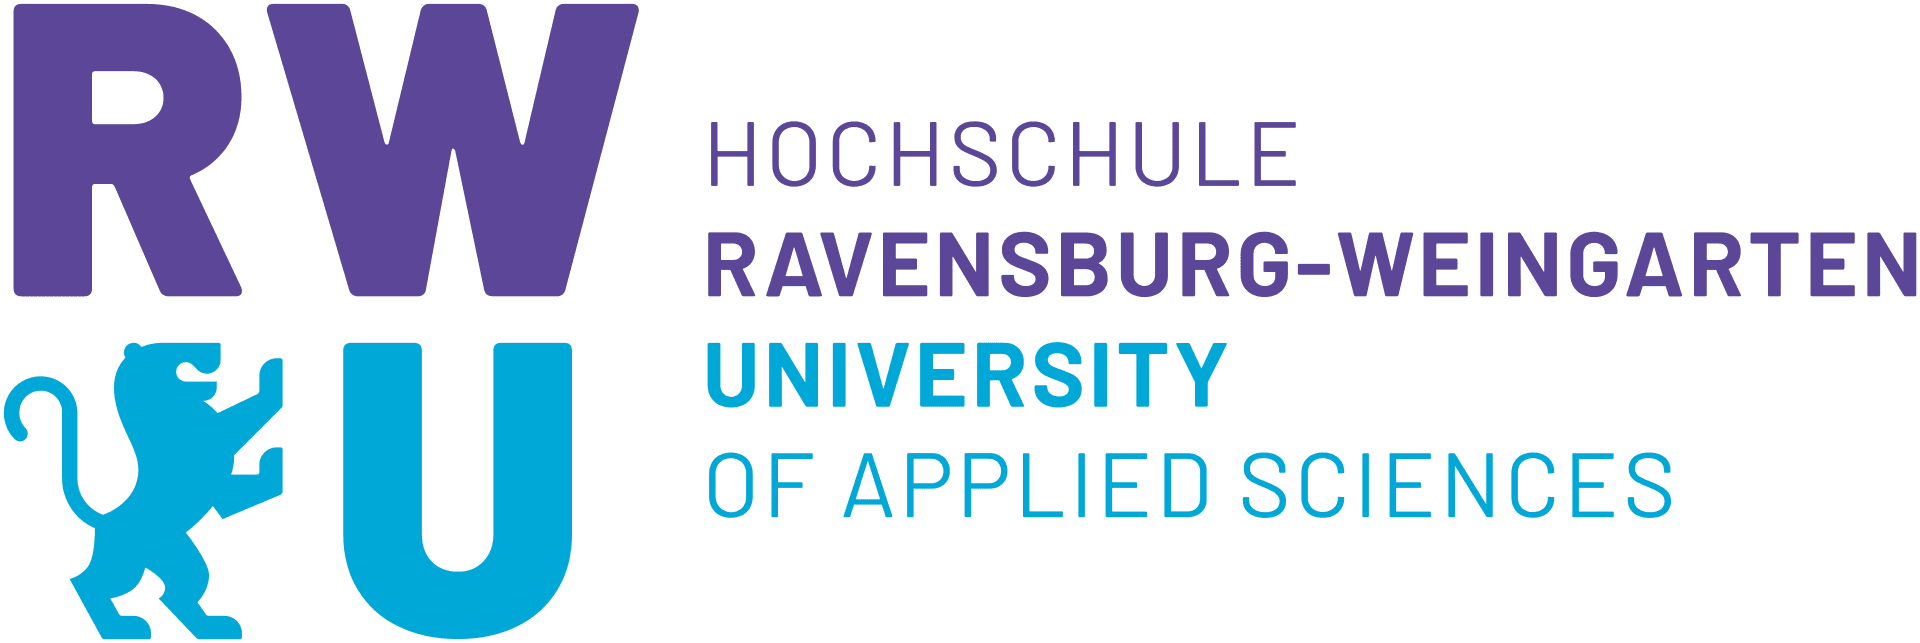 ravensburg-weingarten-university-of-applied-sciences-33b610fb23-cover-picture